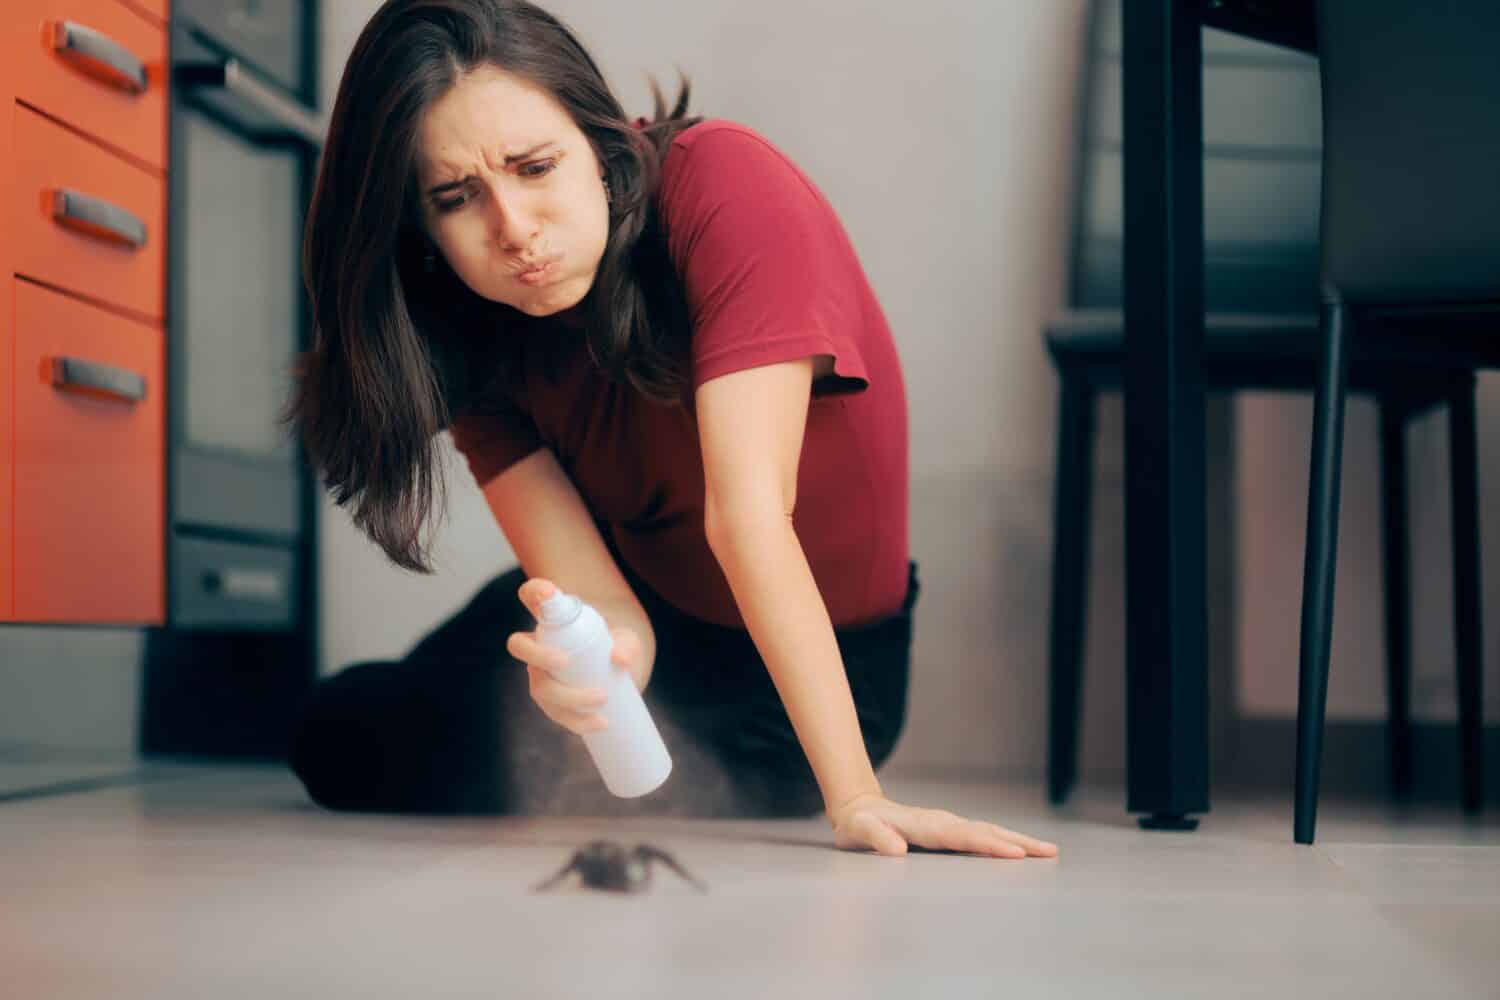 Woman Spraying with Insecticide Over an Ant on the Kitchen Floor. Homeowner dealing with pest infestation problem in her own apparent